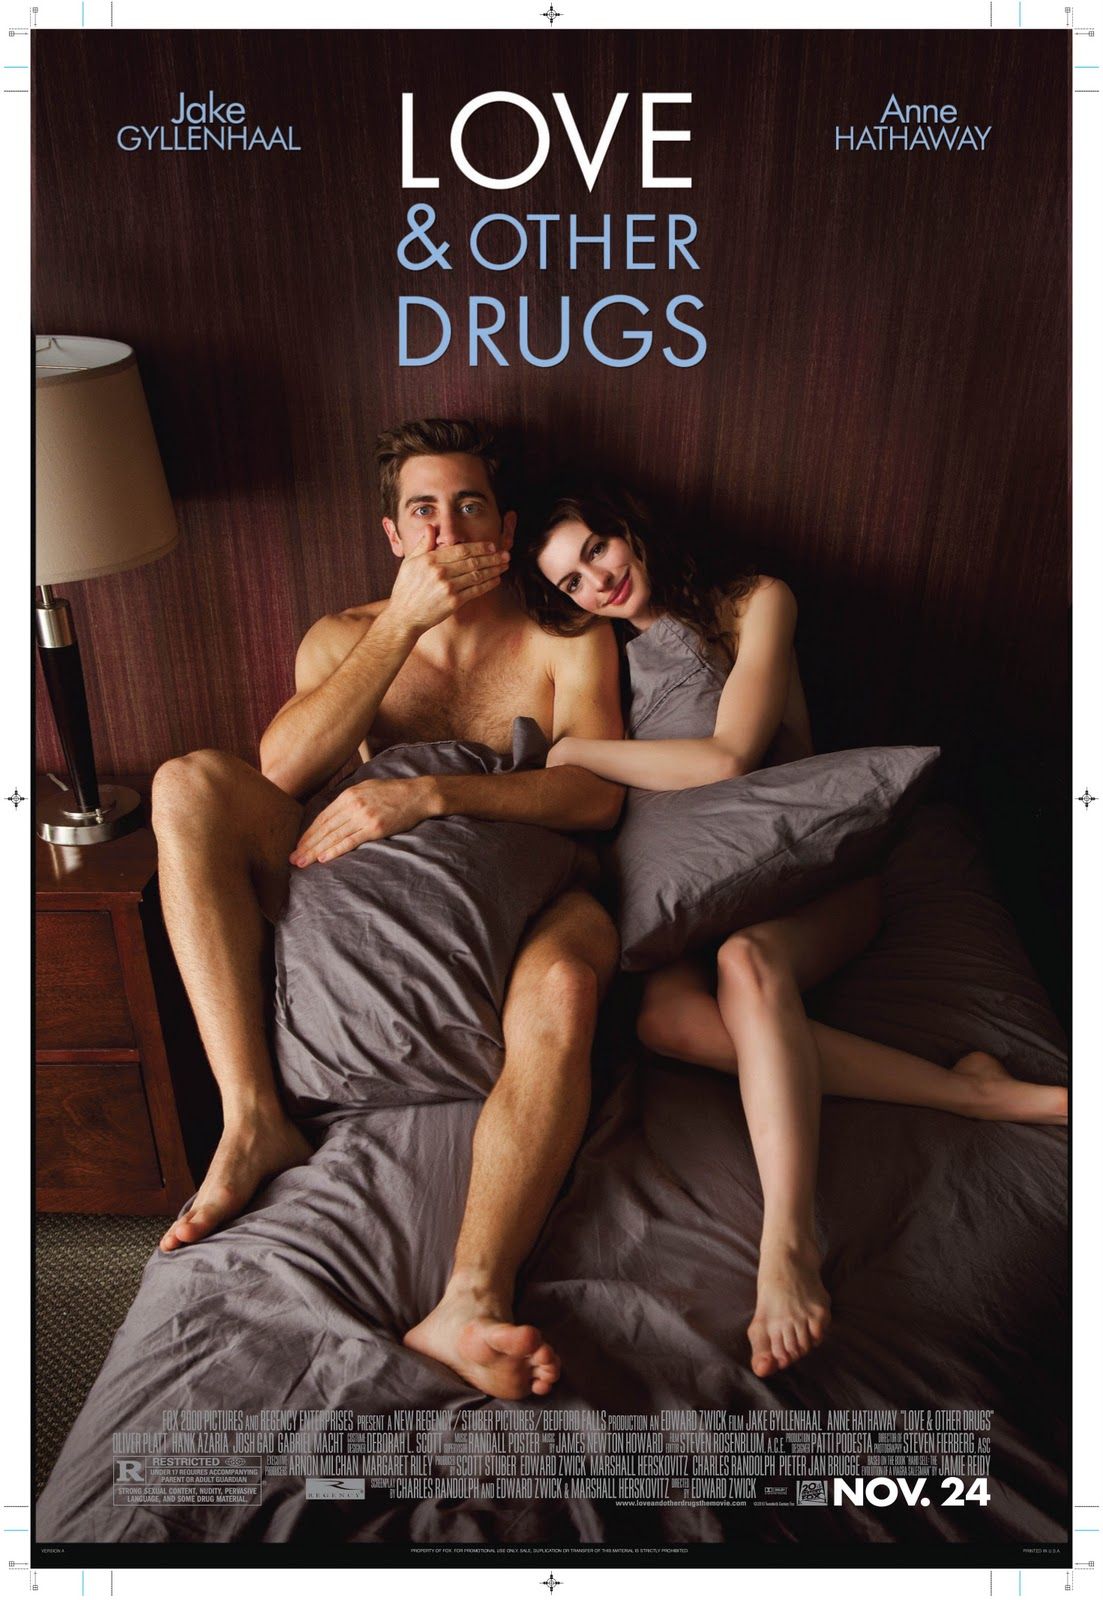 Love and other drugs songs download